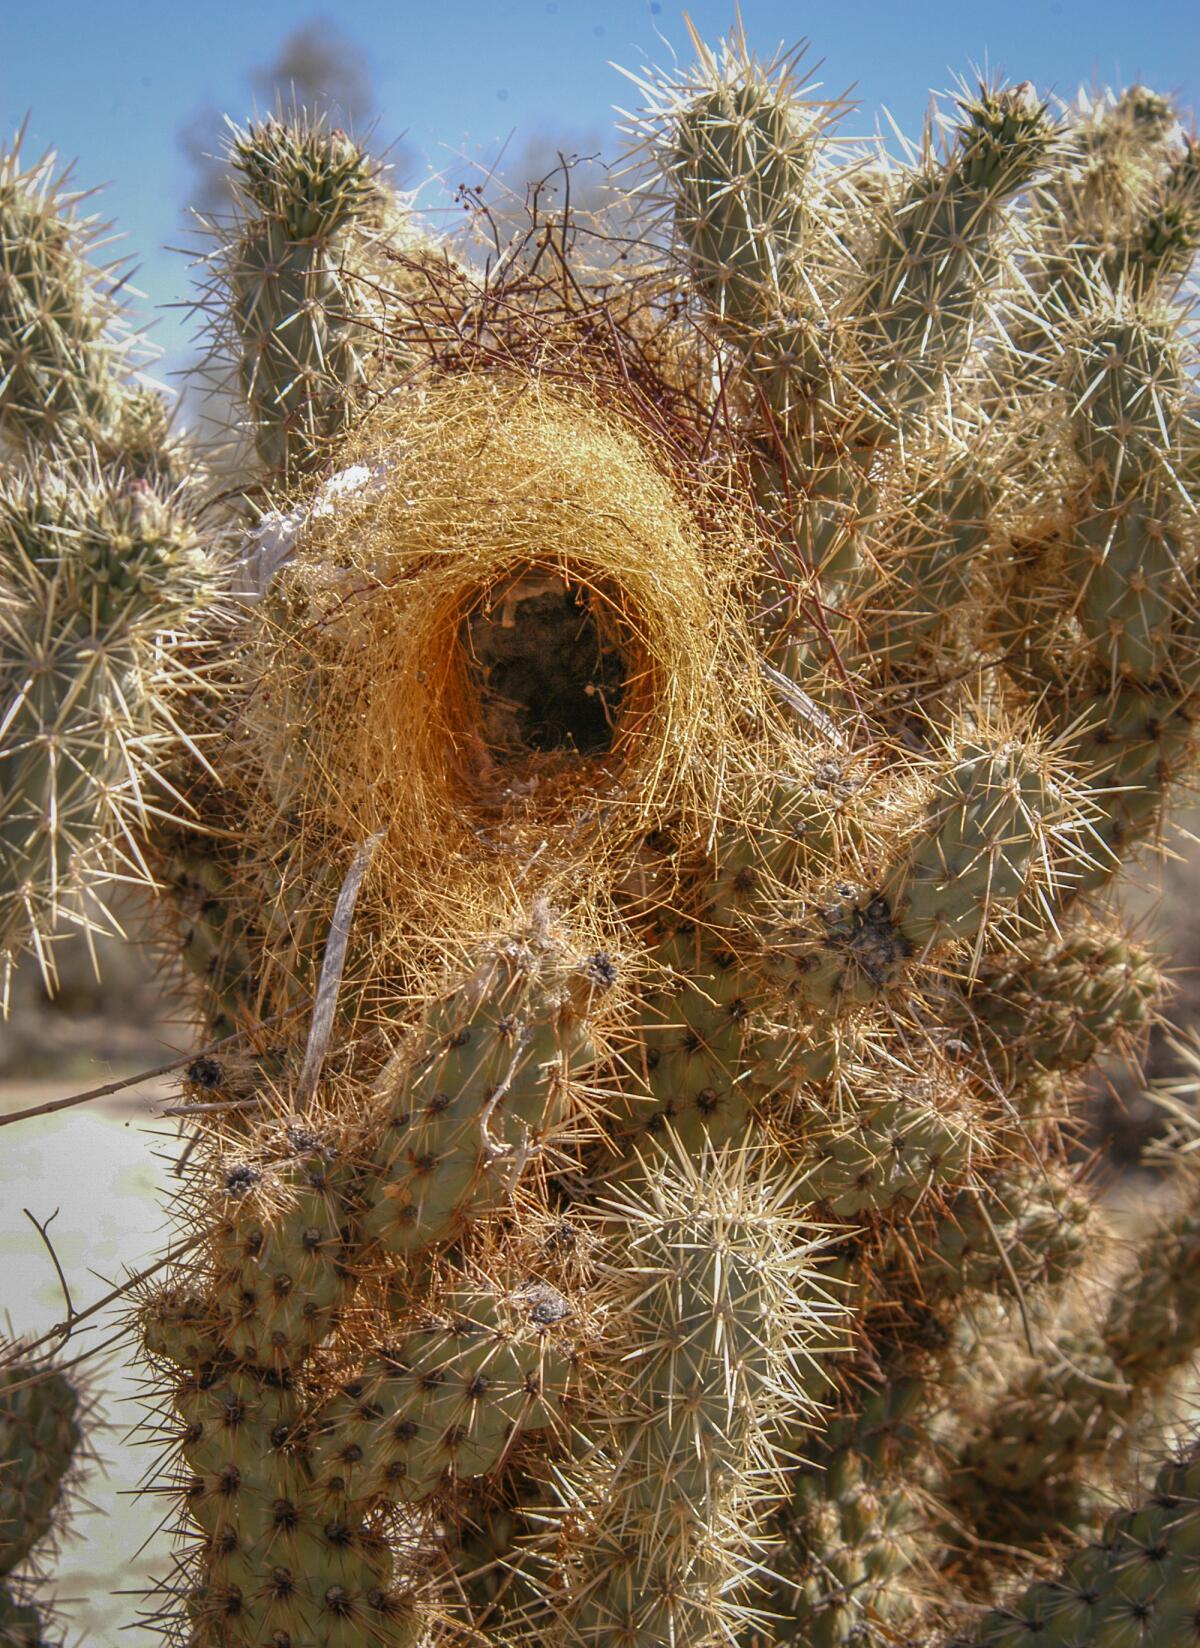 A wren's pouch nest cradled in a cactus plant.